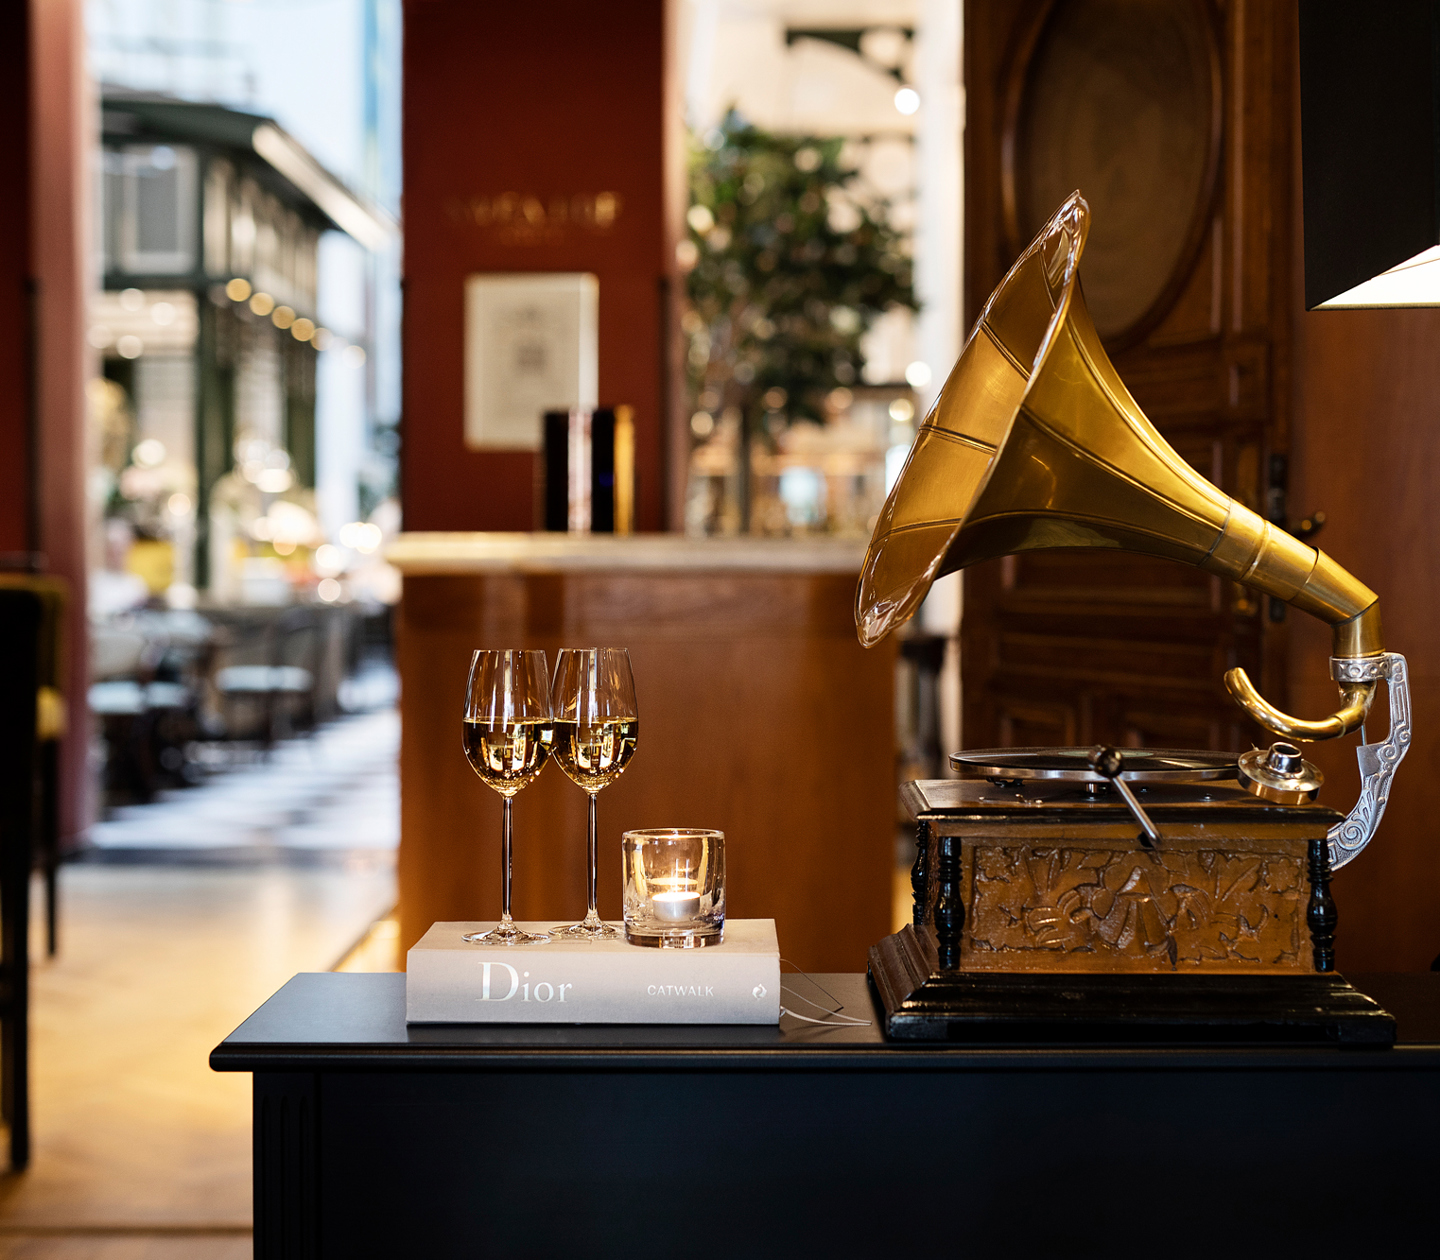 Bar environment with gold gramophone and two wine glasses